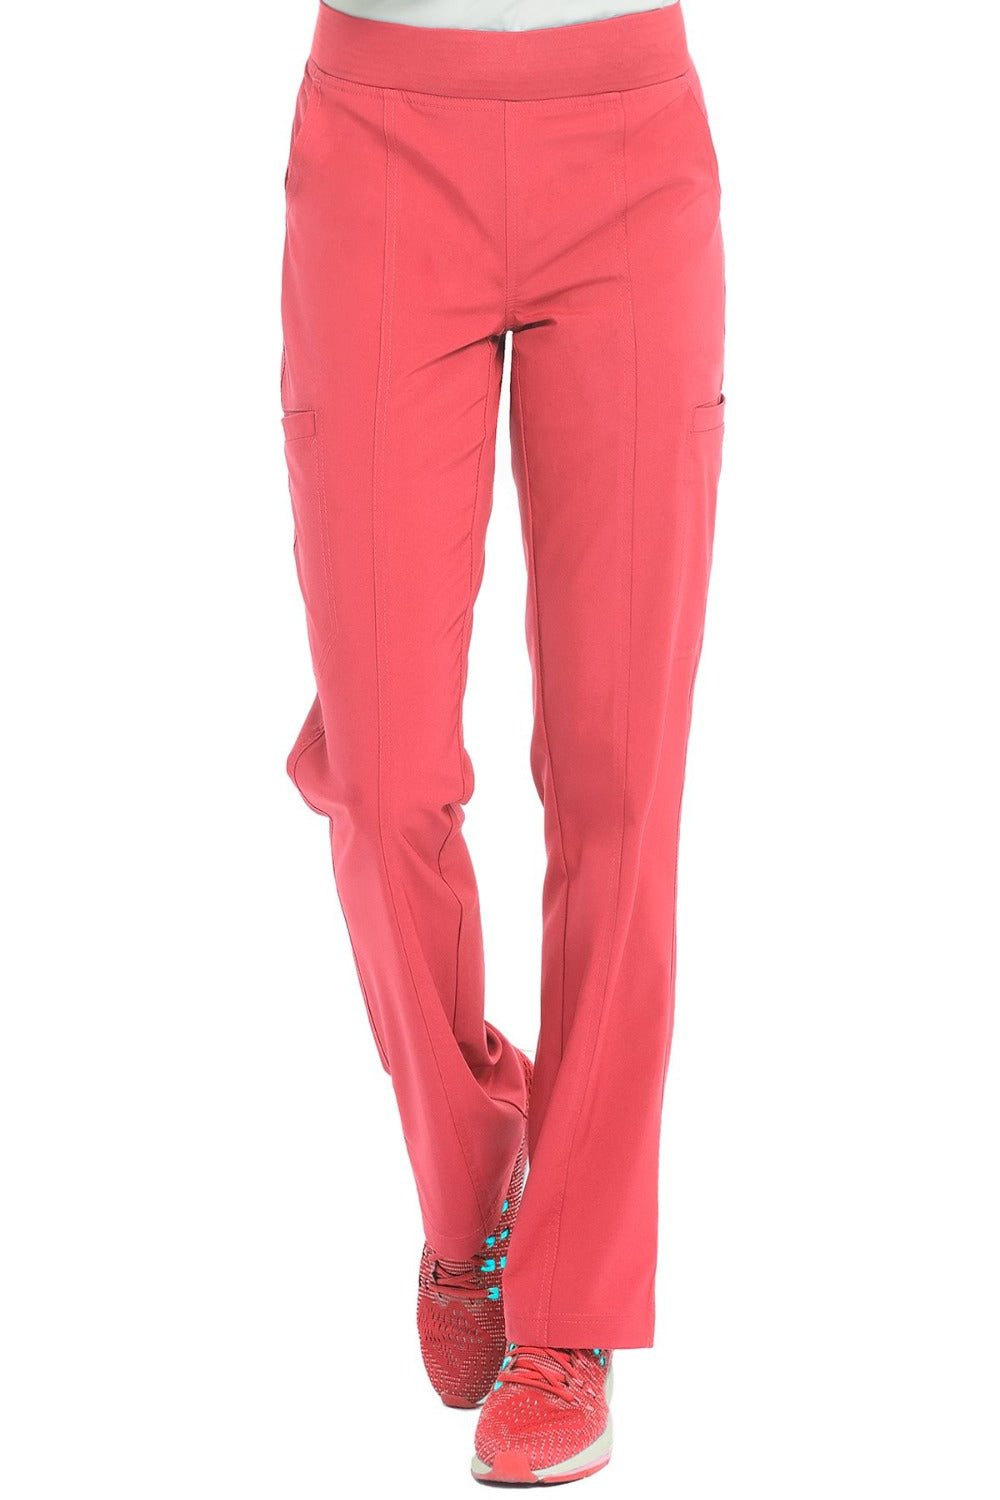 Med Couture Scrub Pant Energy Paige Cargo Scrub Pant in Coral at Parker's Clothing and Shoes.